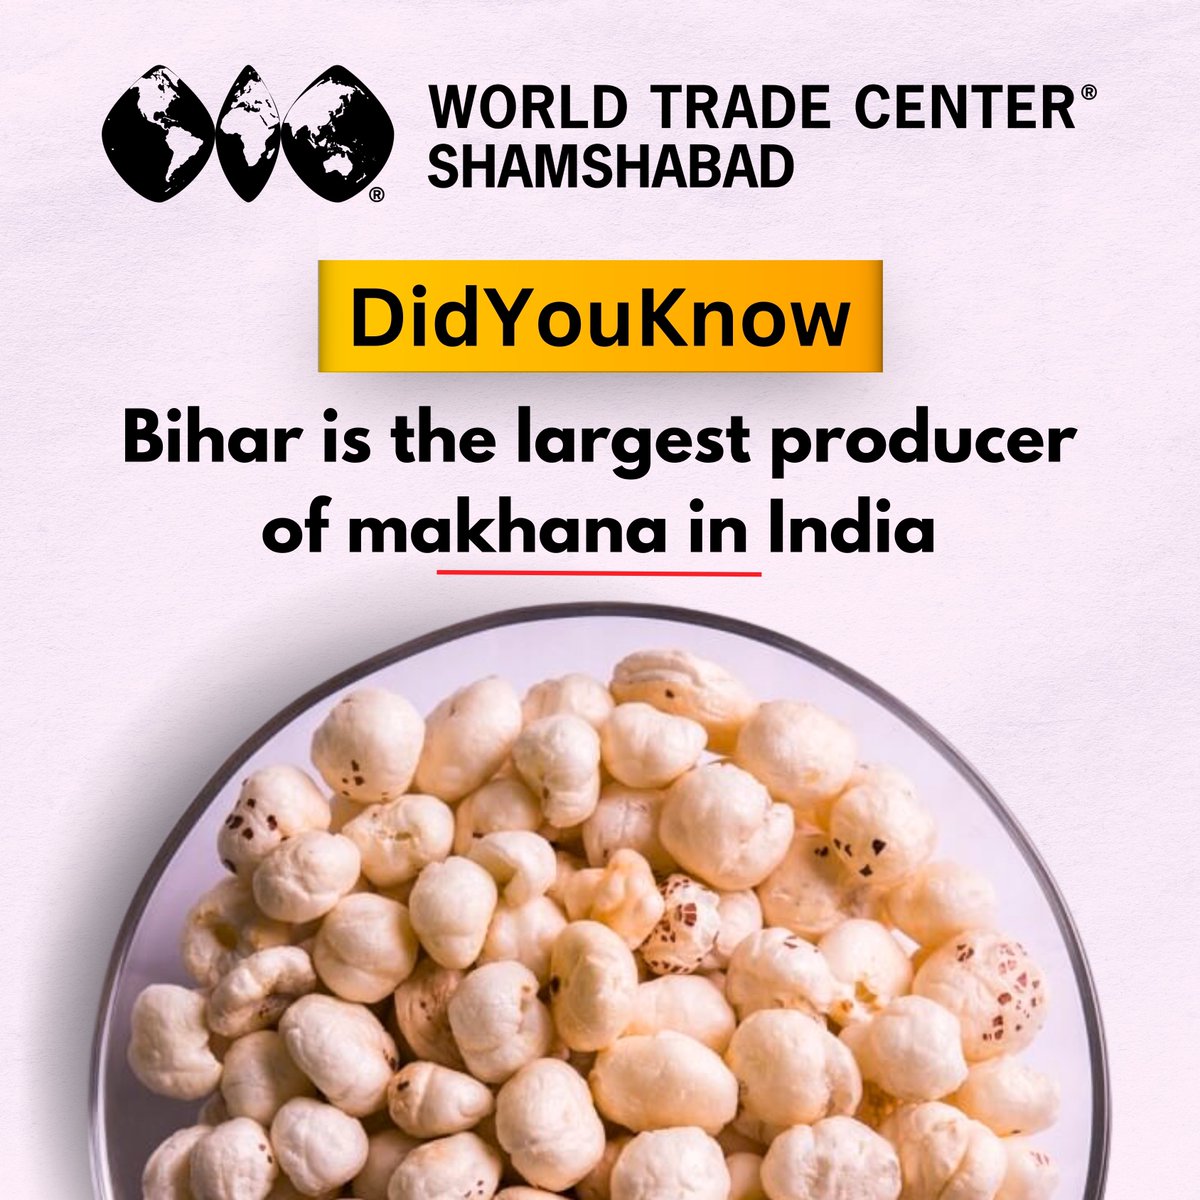 𝗗𝗶𝗱 𝗬𝗼𝘂 𝗞𝗻𝗼𝘄?

Bihar produces 90% of the world's fox nuts (Makhana).

Nearly 200 metric tonnes of Makhana is exported annually.

#FoxNuts #Makhana #agriculture #DidYouKnow #Bihar #WorldsLargestProducer #HealthySnacks #Superfood #Export #growth #GlobalTrade #trade